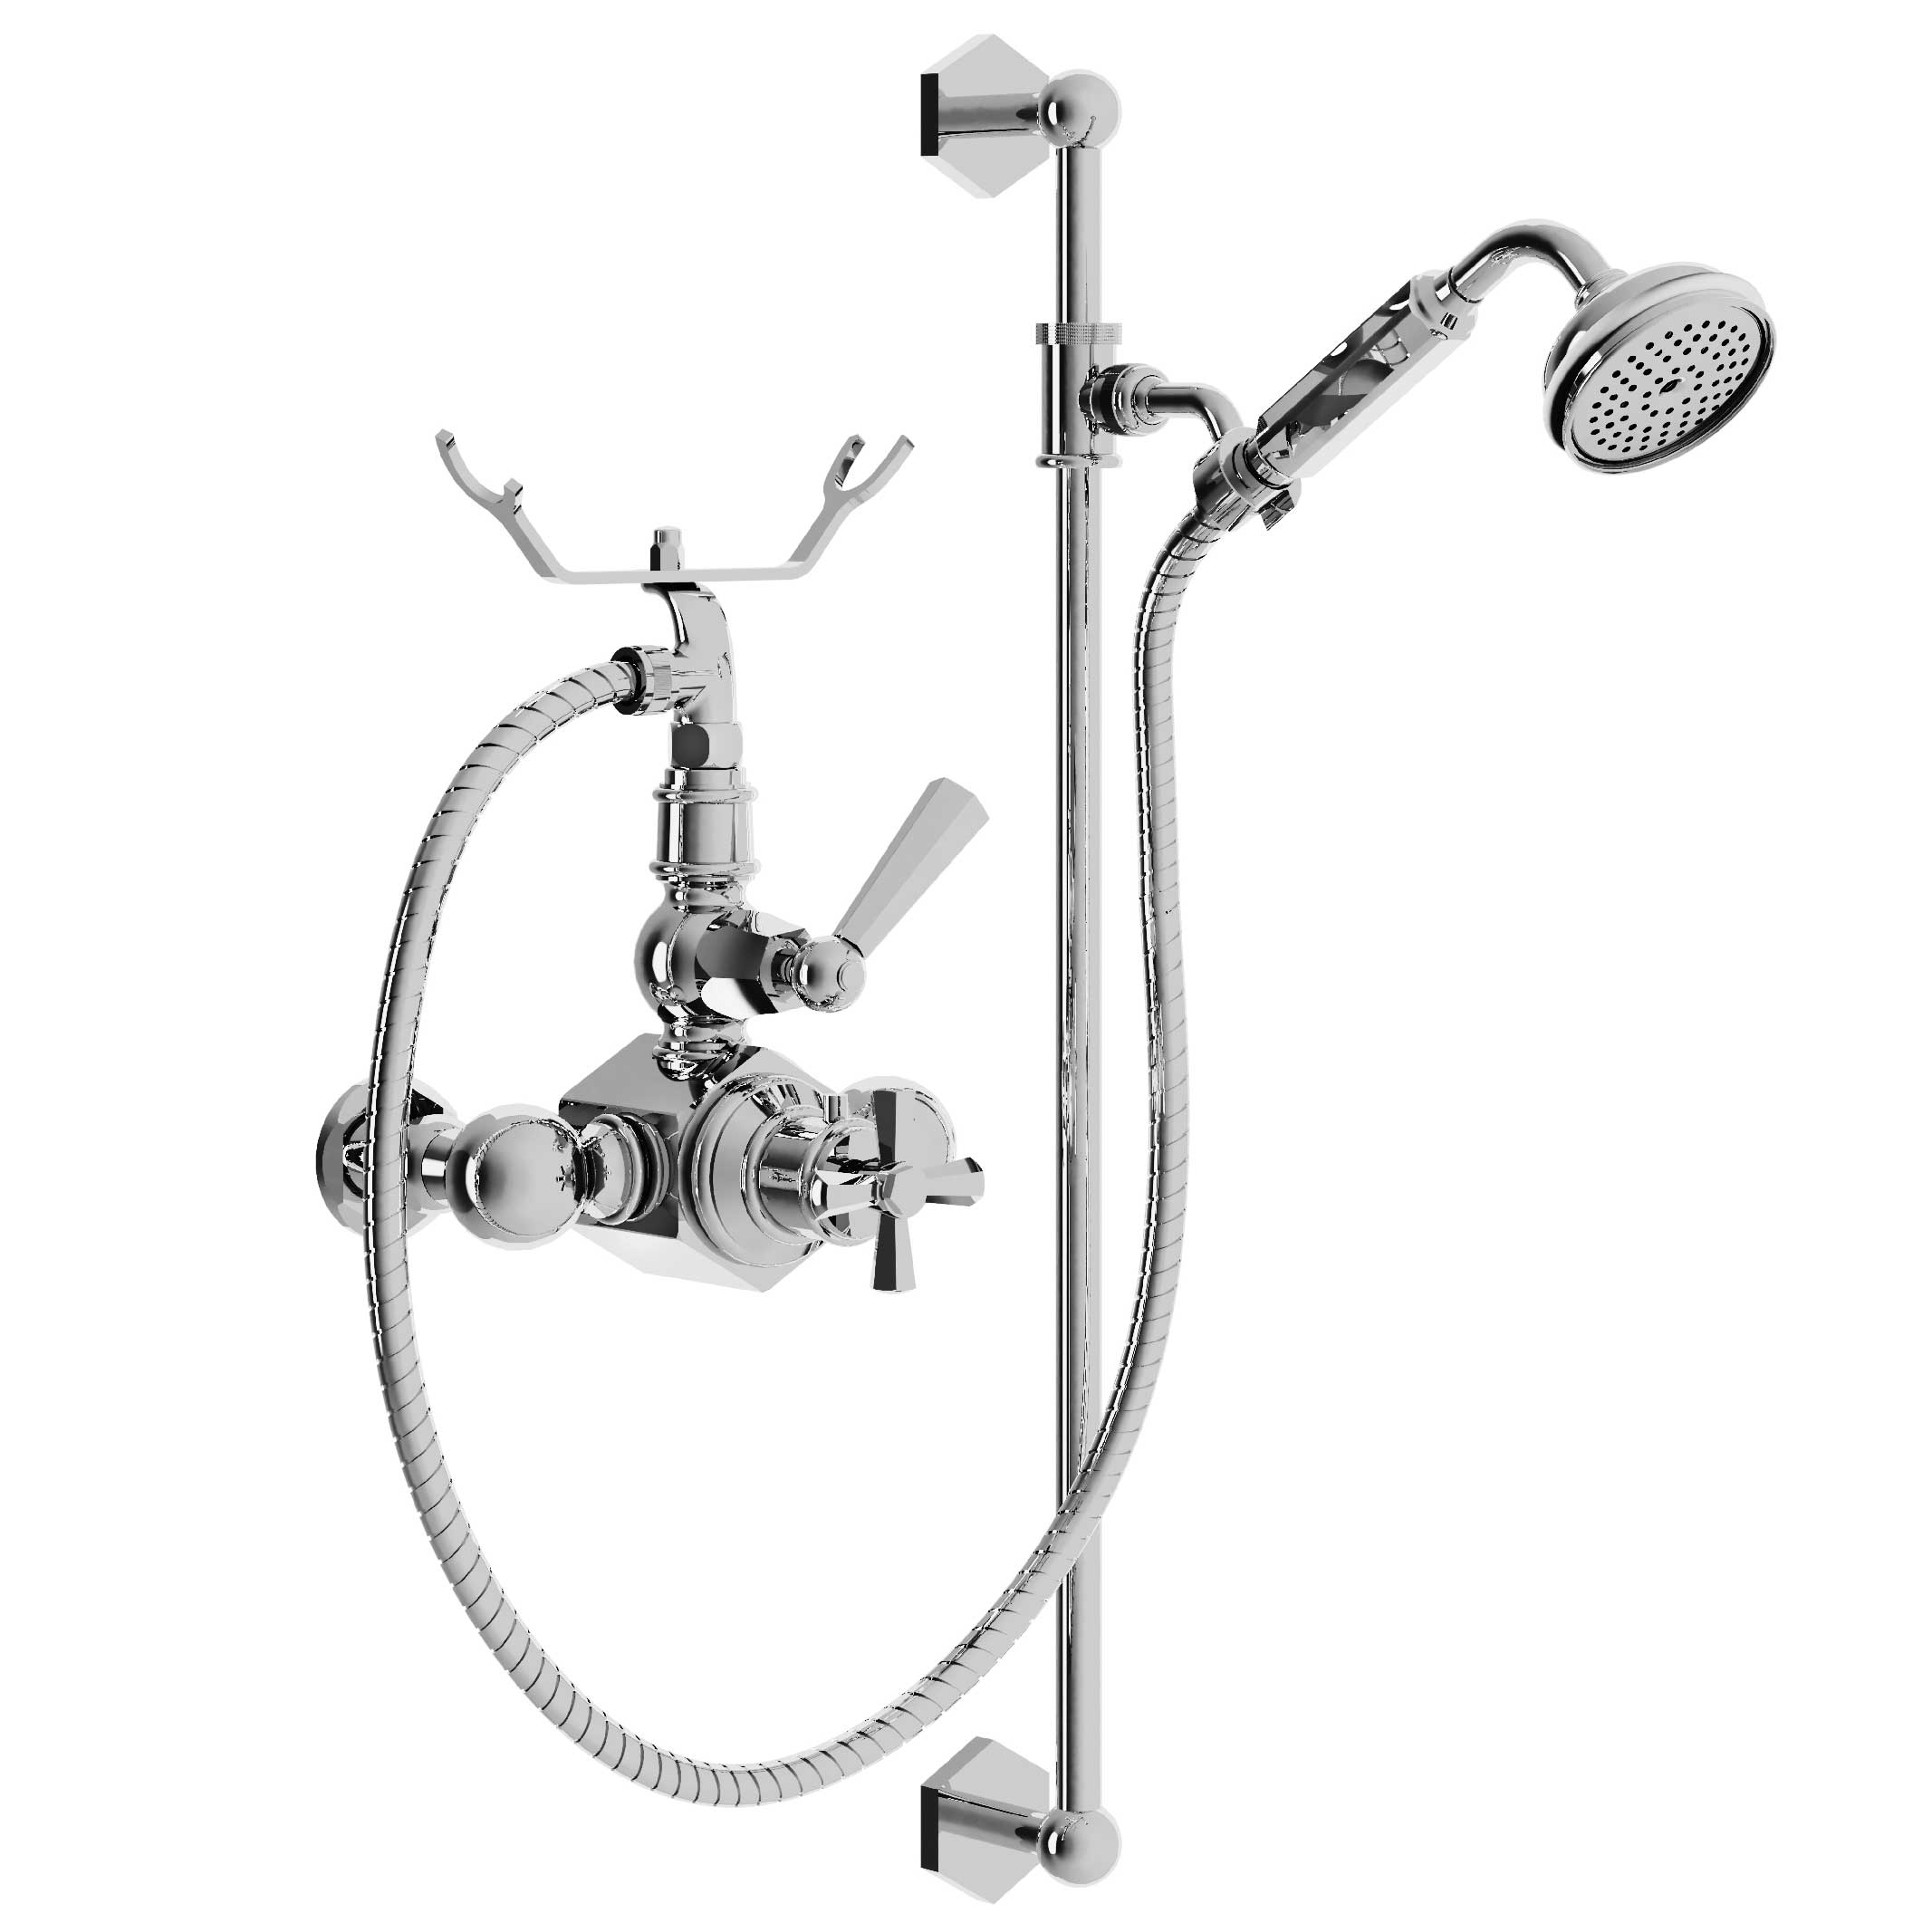 M13-2202T Thermo. shower mixer with sliding bar